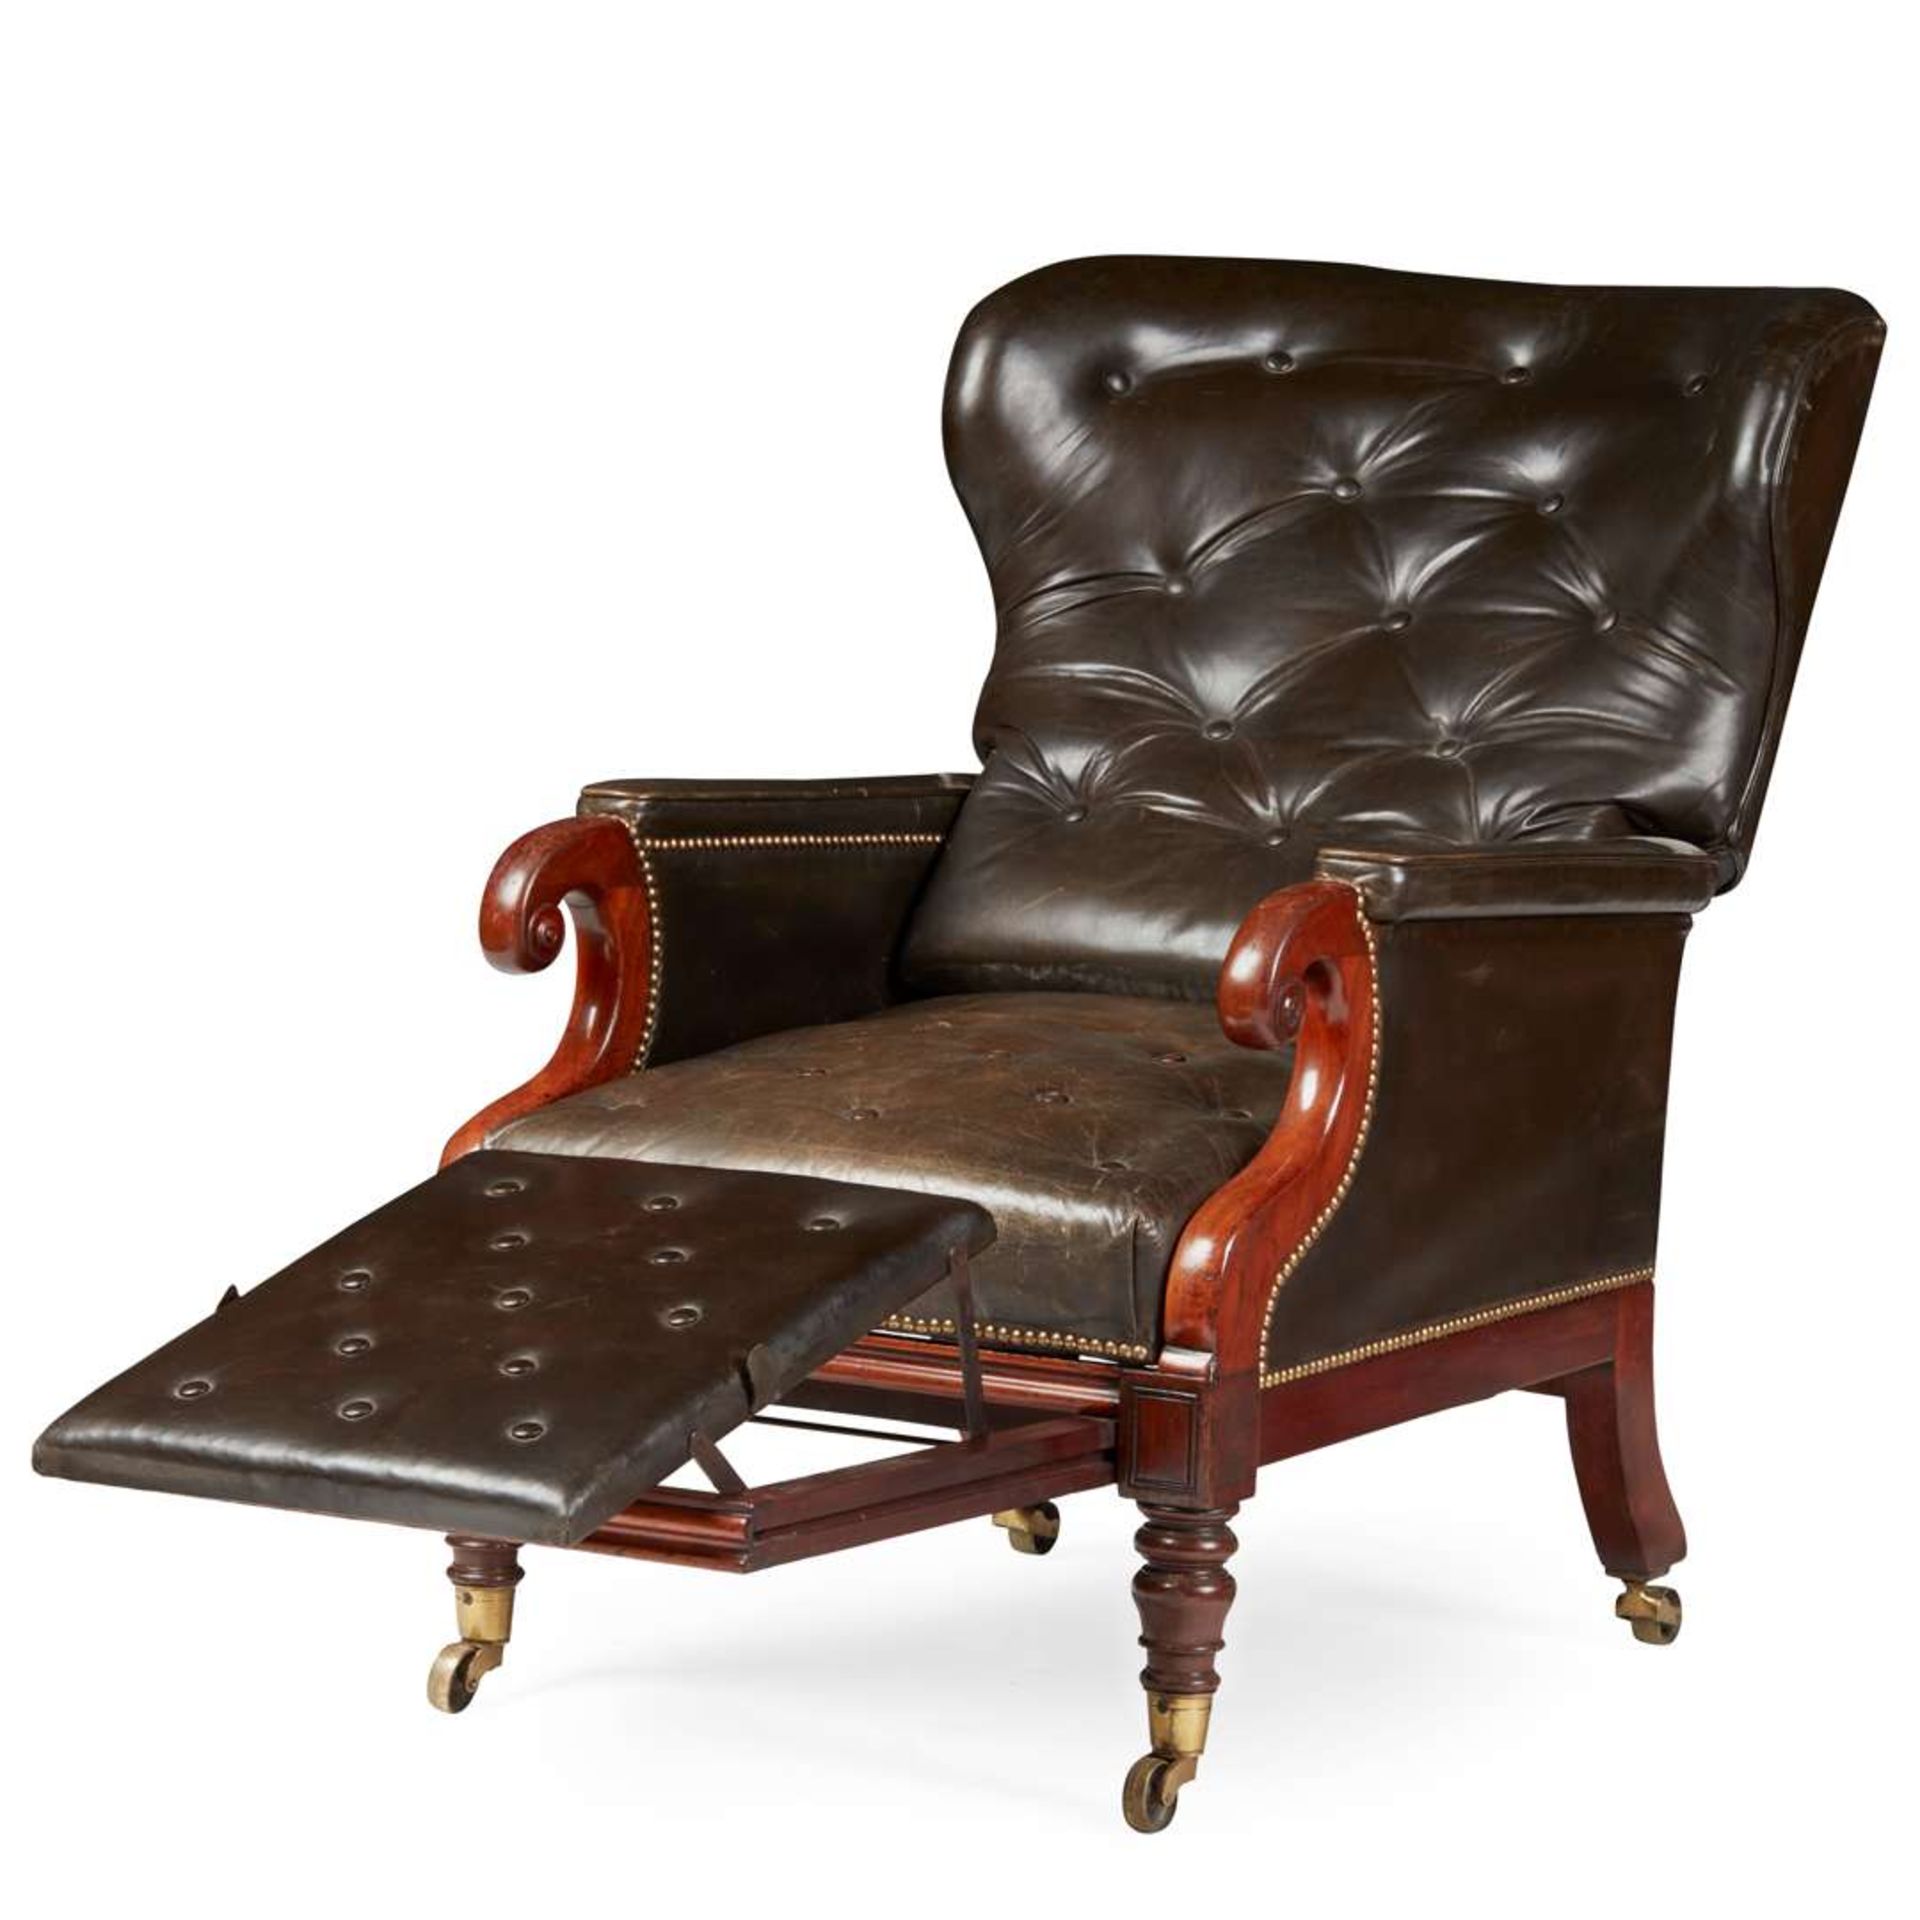 WILLIAM IV MAHOGANY LEATHER UPHOLSTERED RECLINING ARMCHAIR - Image 3 of 3